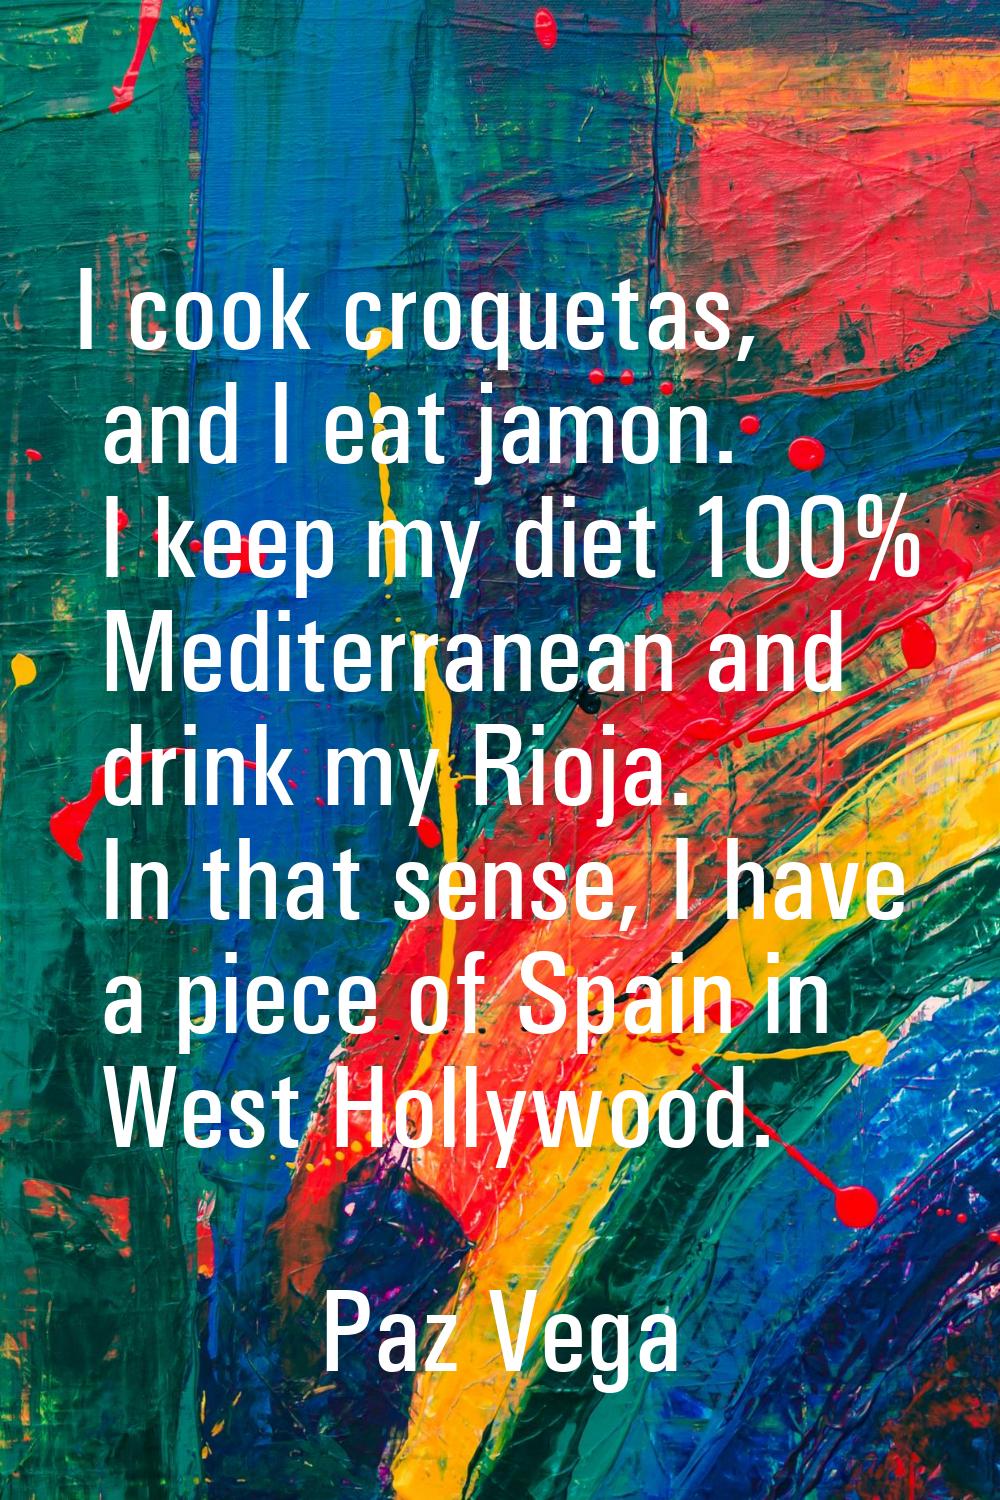 I cook croquetas, and I eat jamon. I keep my diet 100% Mediterranean and drink my Rioja. In that se